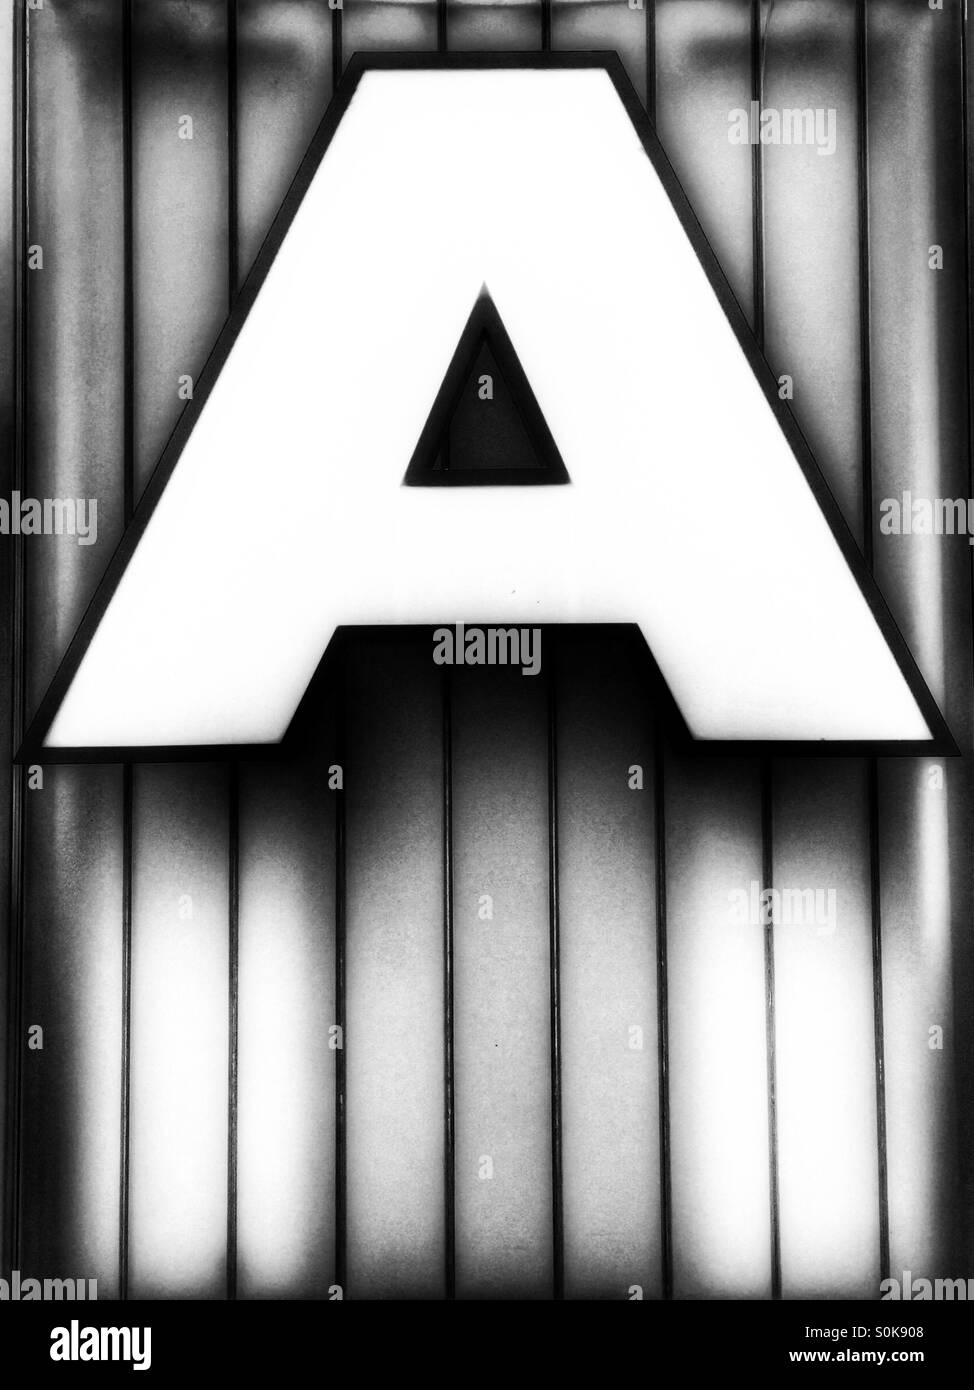 A is for anything, simple style. Stock Photo